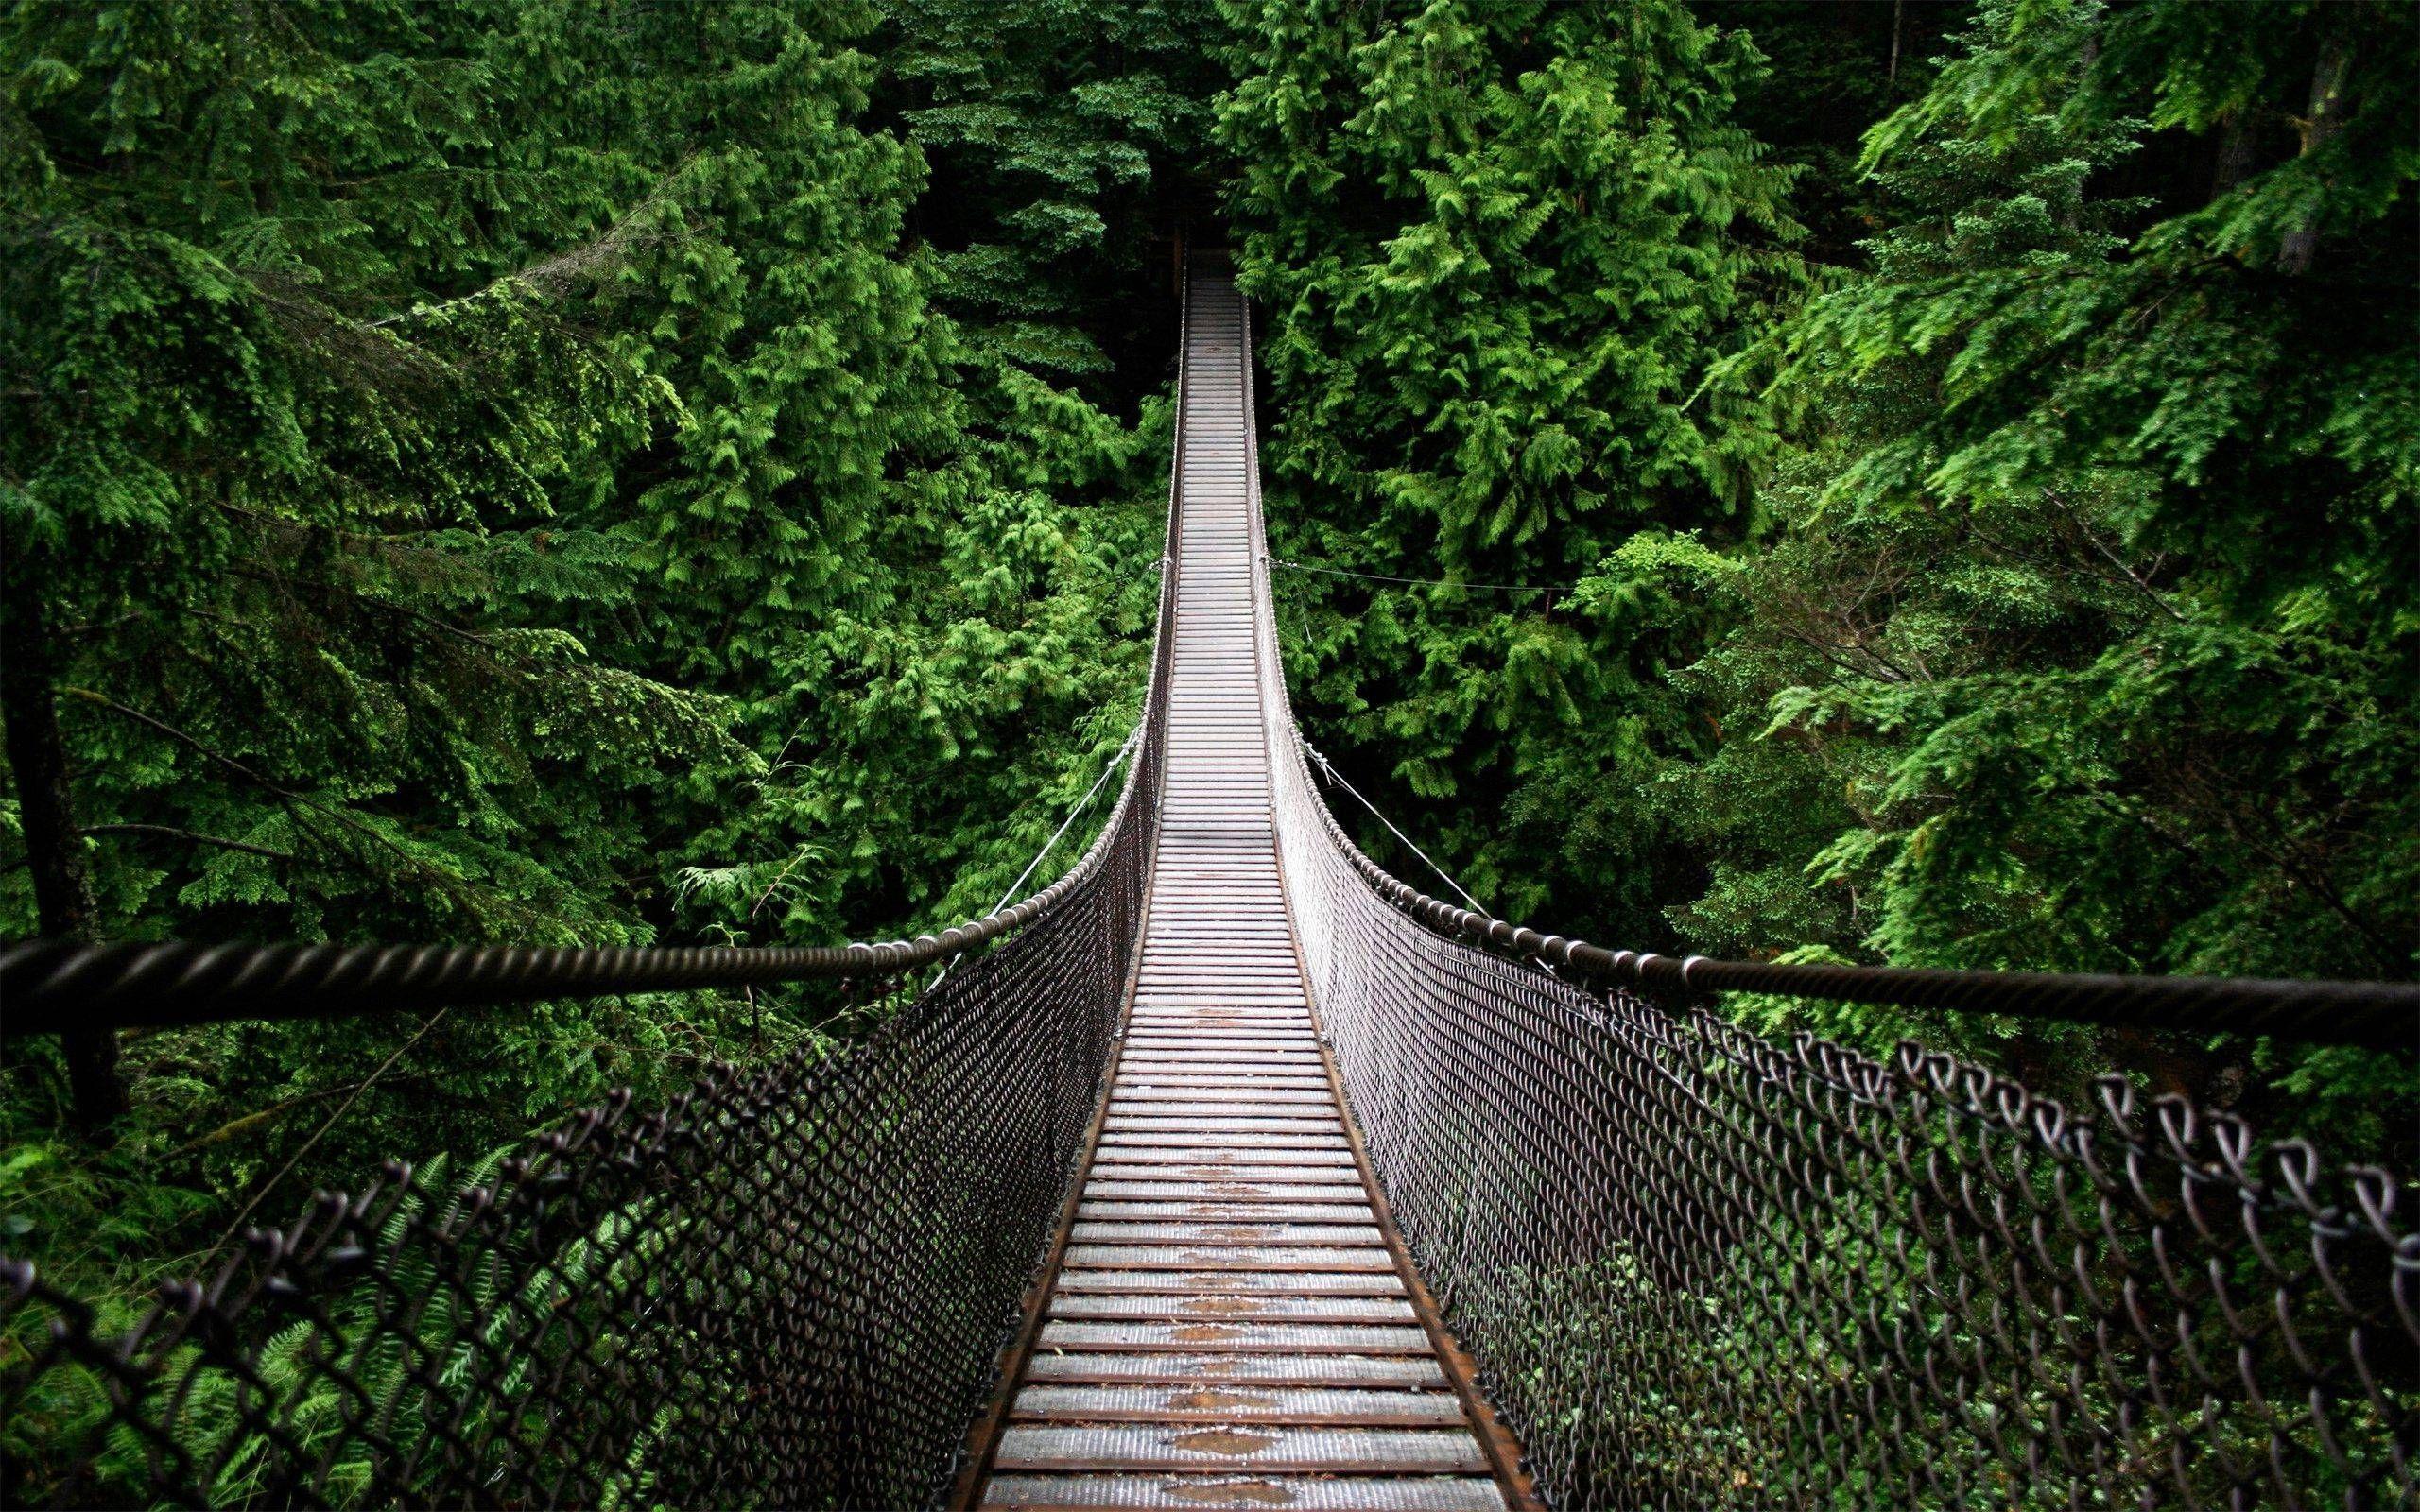 Forest Bridge Wallpapers Top Free Forest Bridge Backgrounds